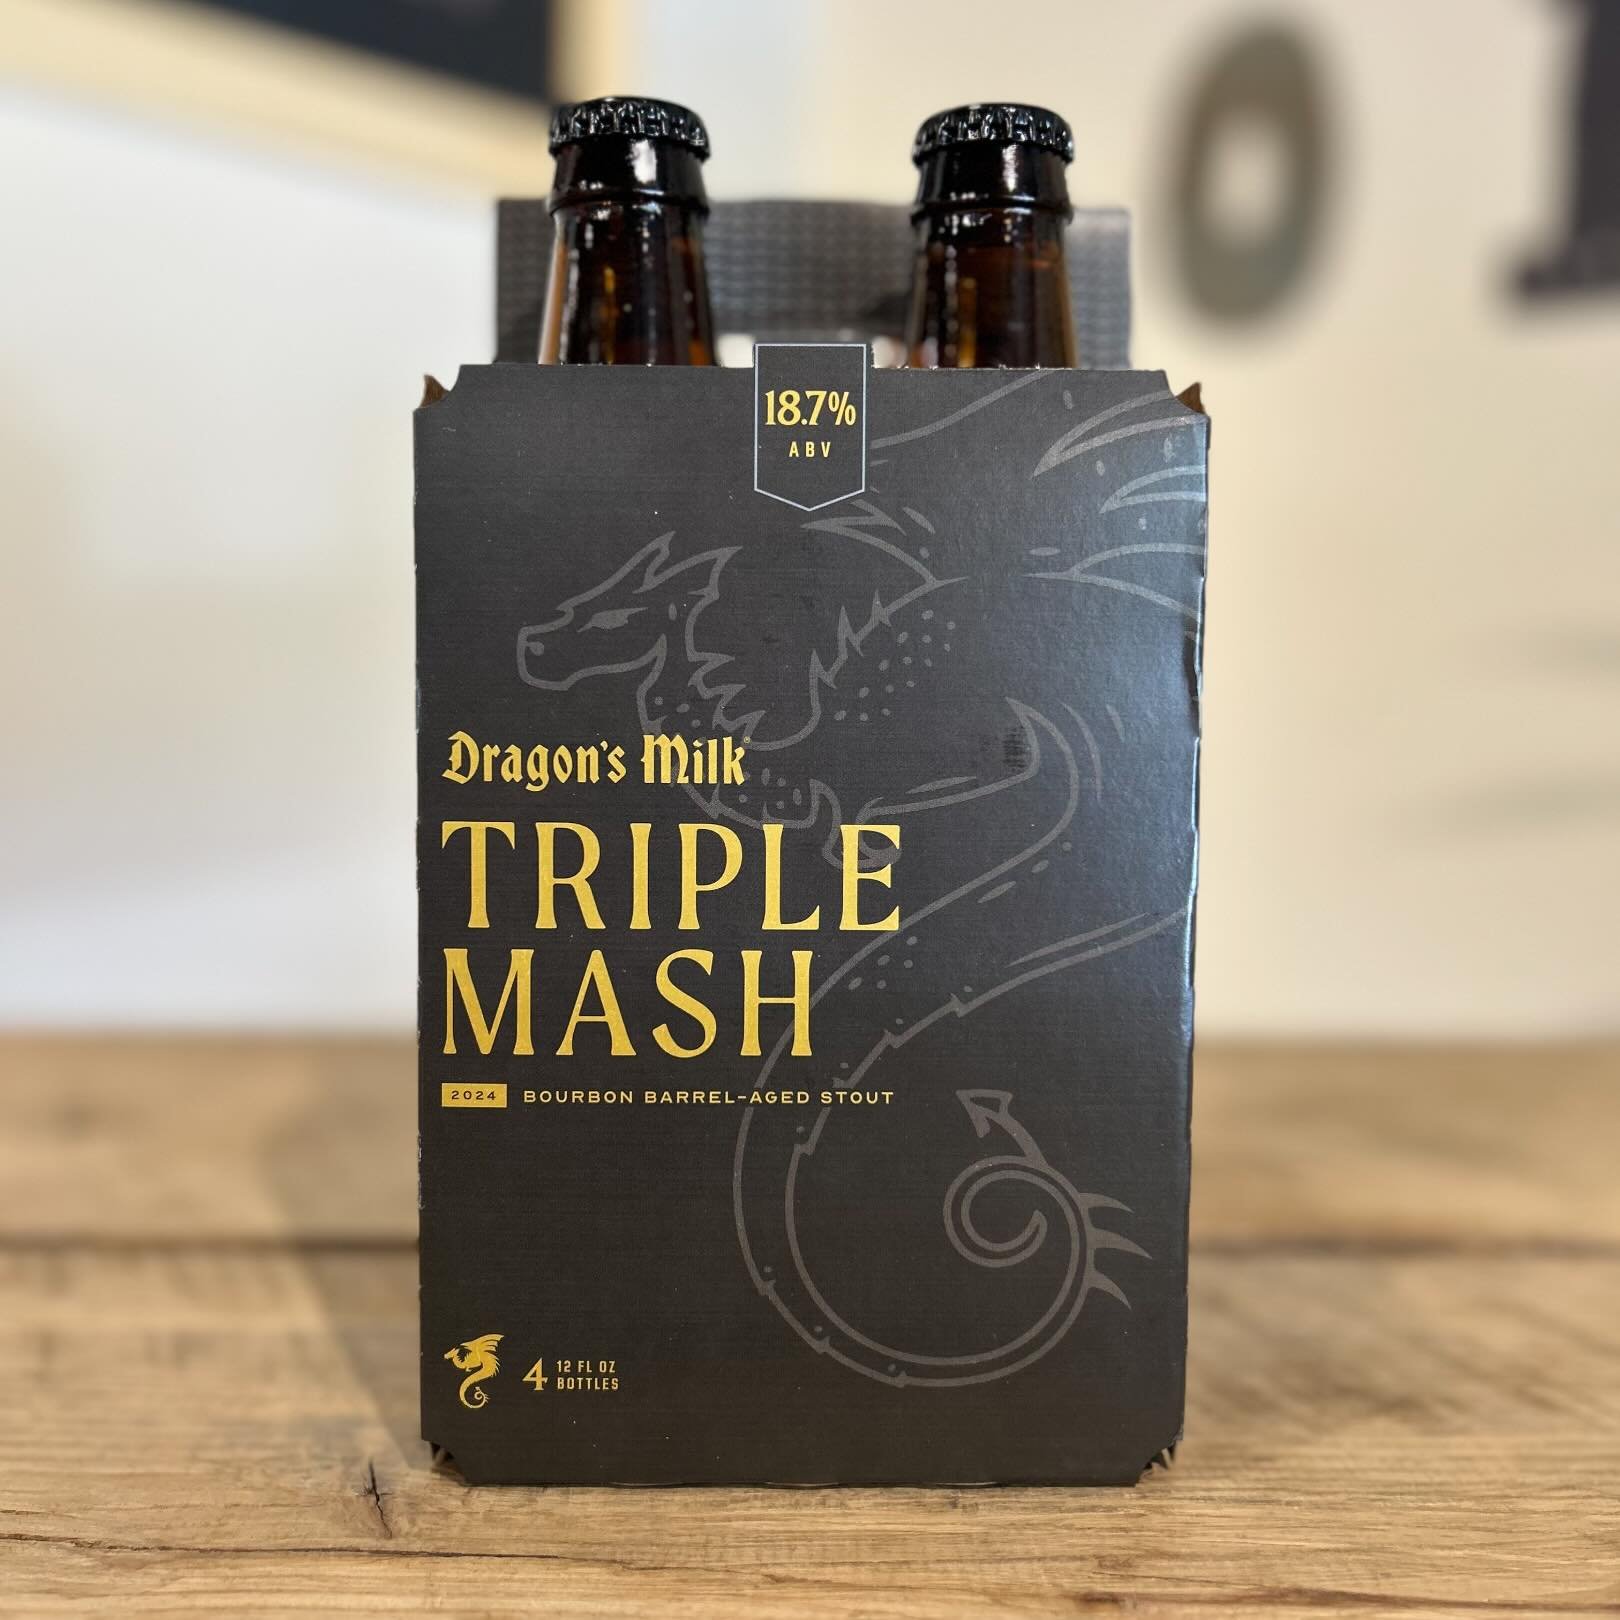 New, to us, from @dragonsmilkofficial #NowAvailable #SudburyCraftBeer #TheSuds
&mdash;
🔥The beast is back, and might we add bigger than EVER!
This year&rsquo;s Triple Mash clocks in at 18.7% ALC/VOL and results from years of honing technique and pus